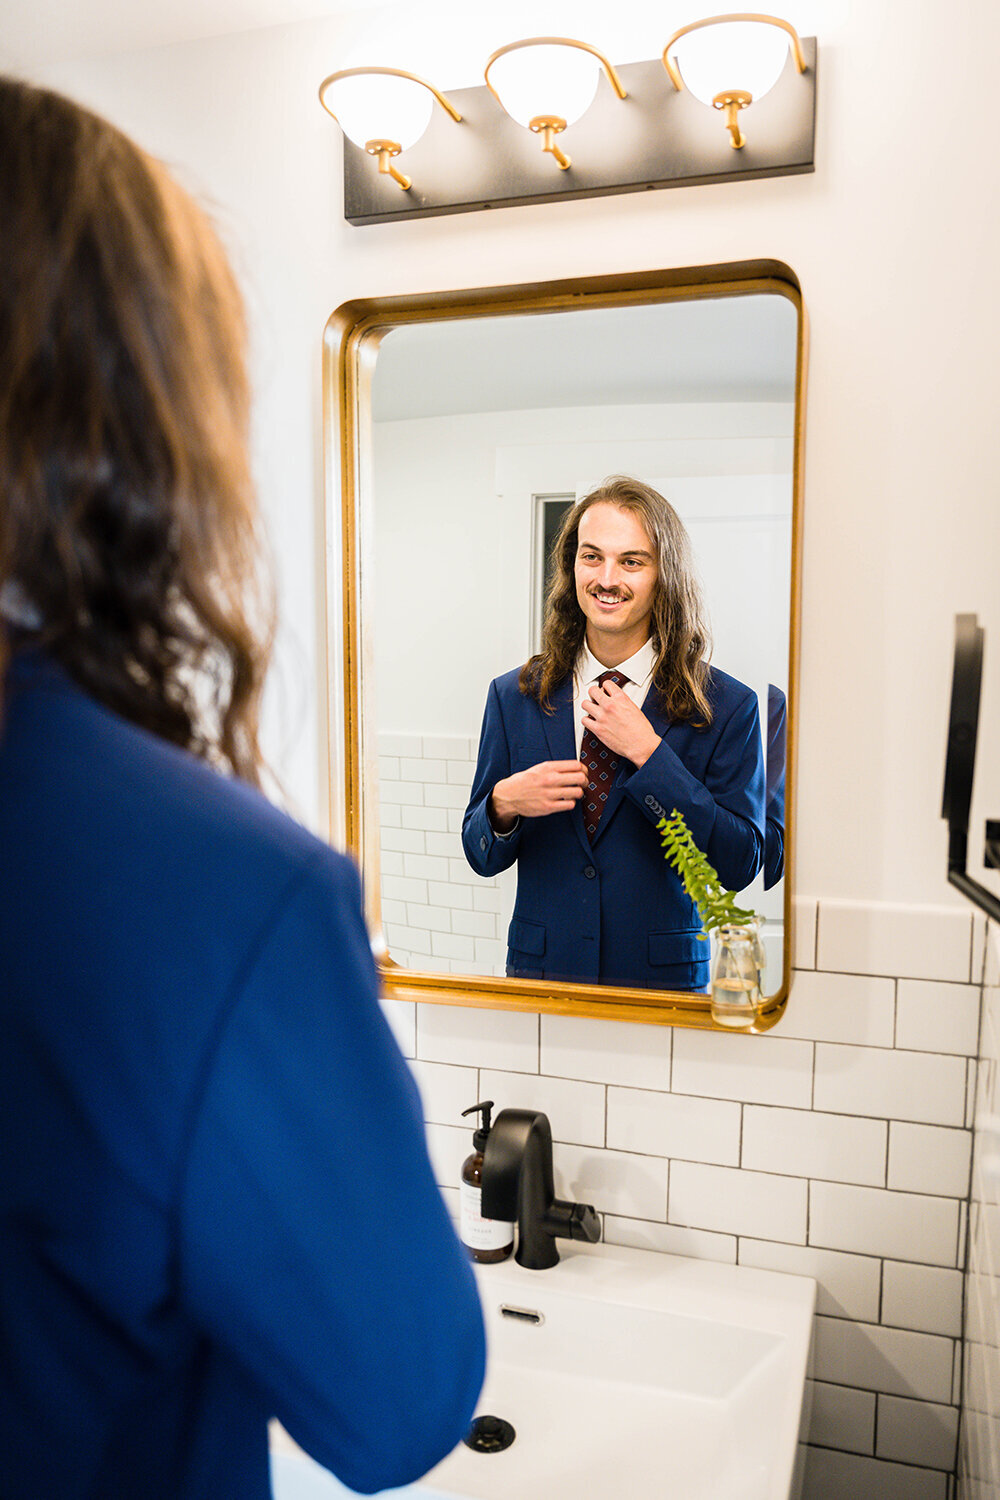 A marrier on his elopement day adjusts his tie in the mirror of a clean and modern hotel bathroom.